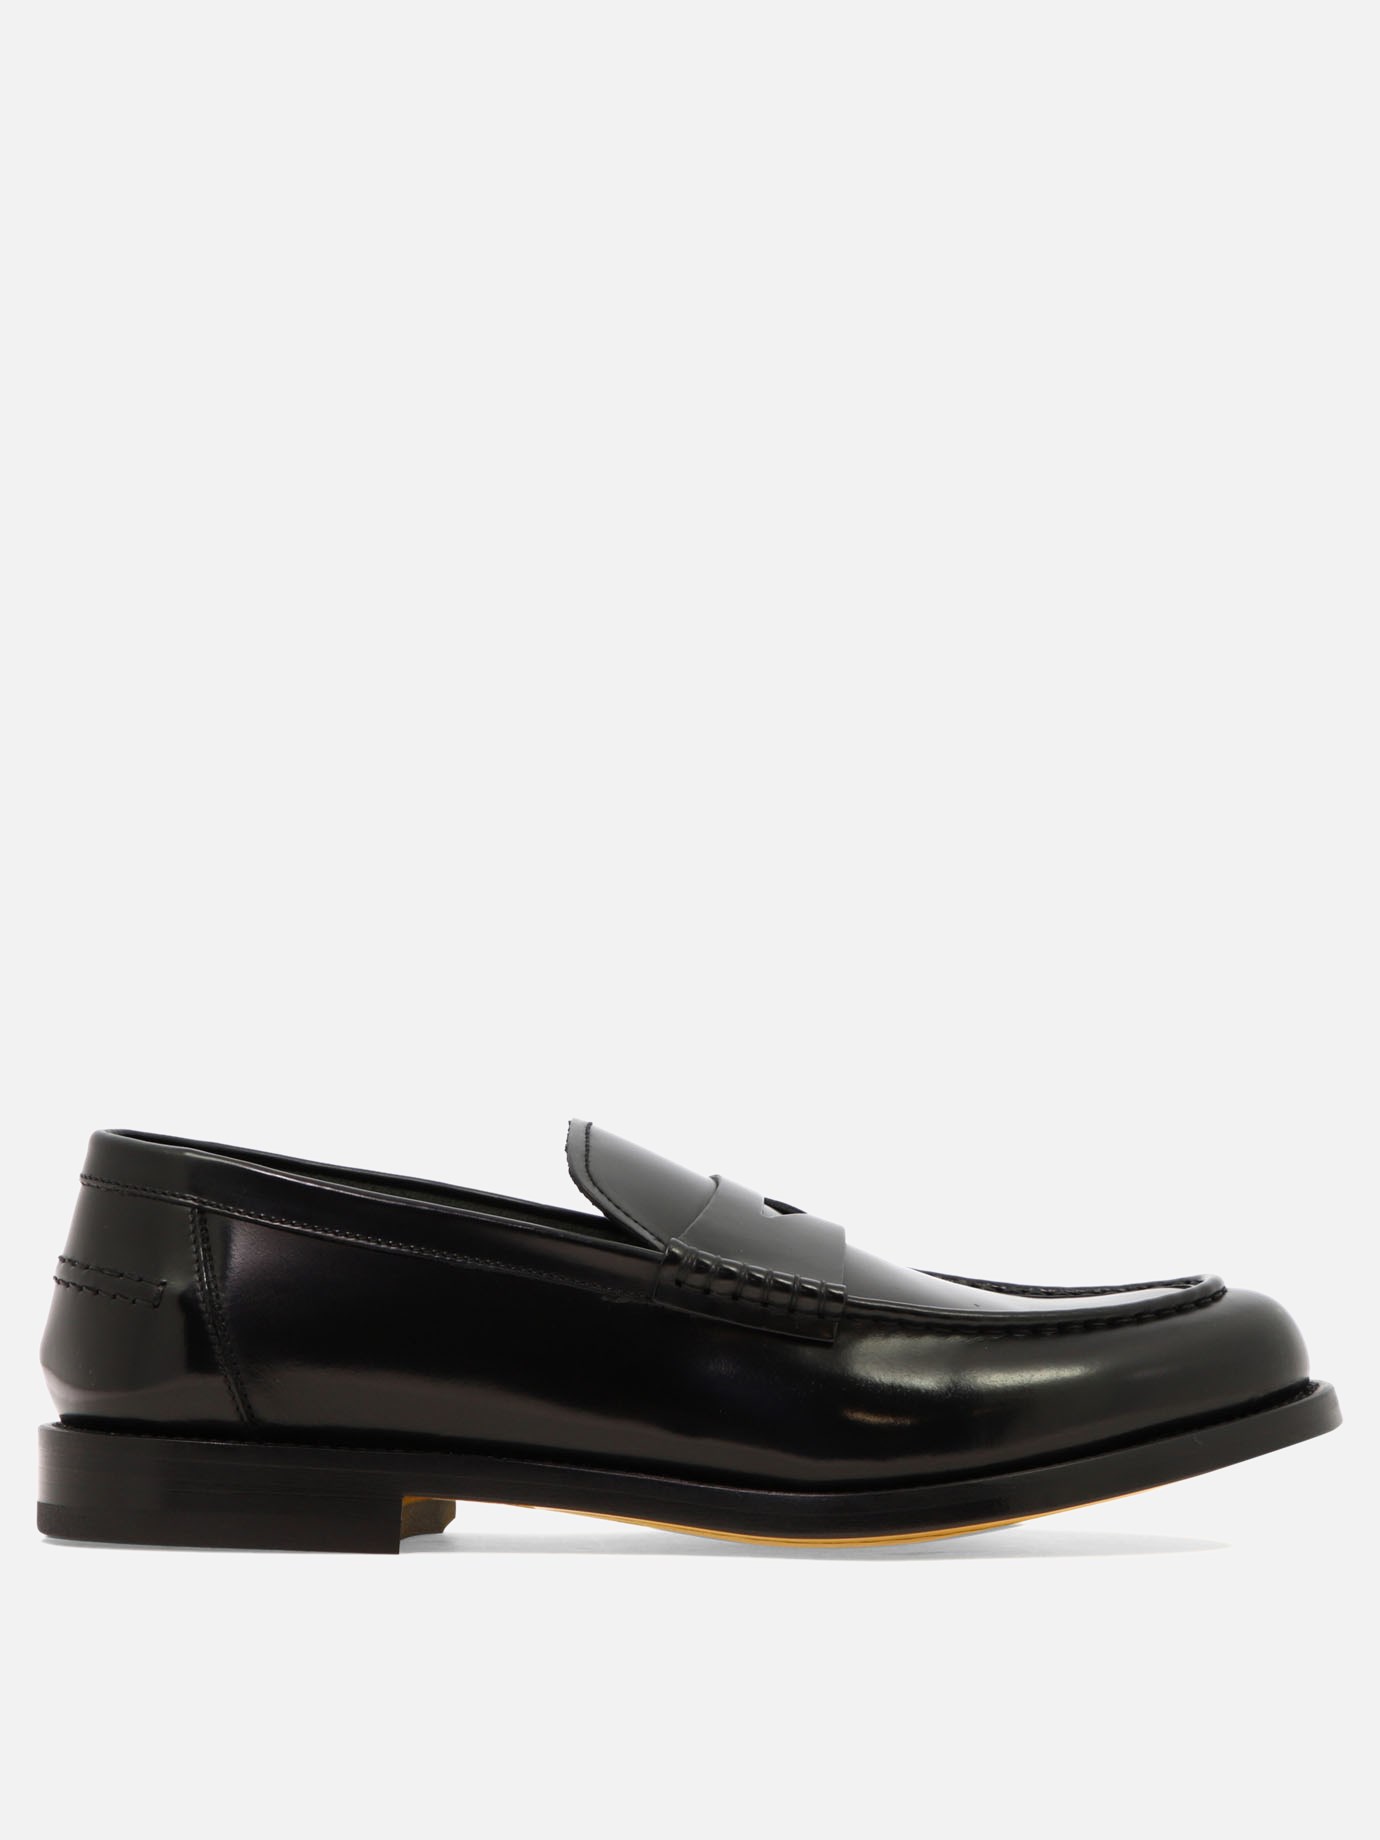  Penny  loafersby Doucal's - 2